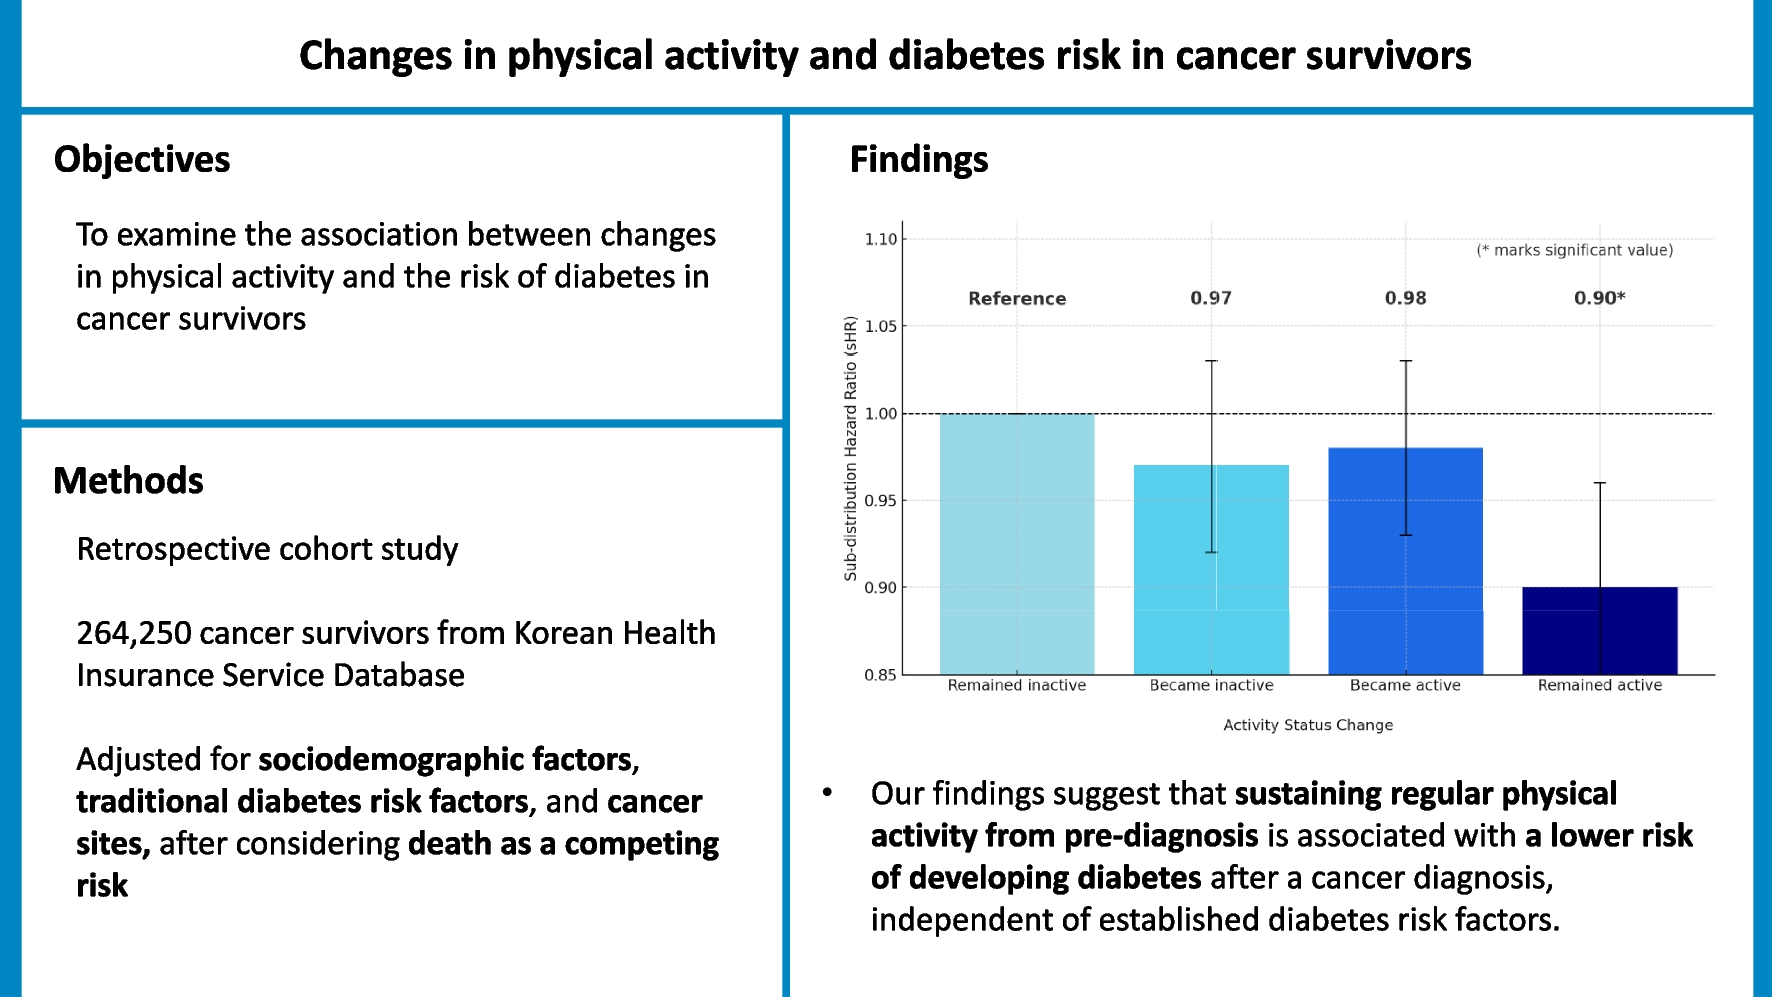 Changes in physical activity and diabetes risk after cancer diagnosis: a nationwide cohort study